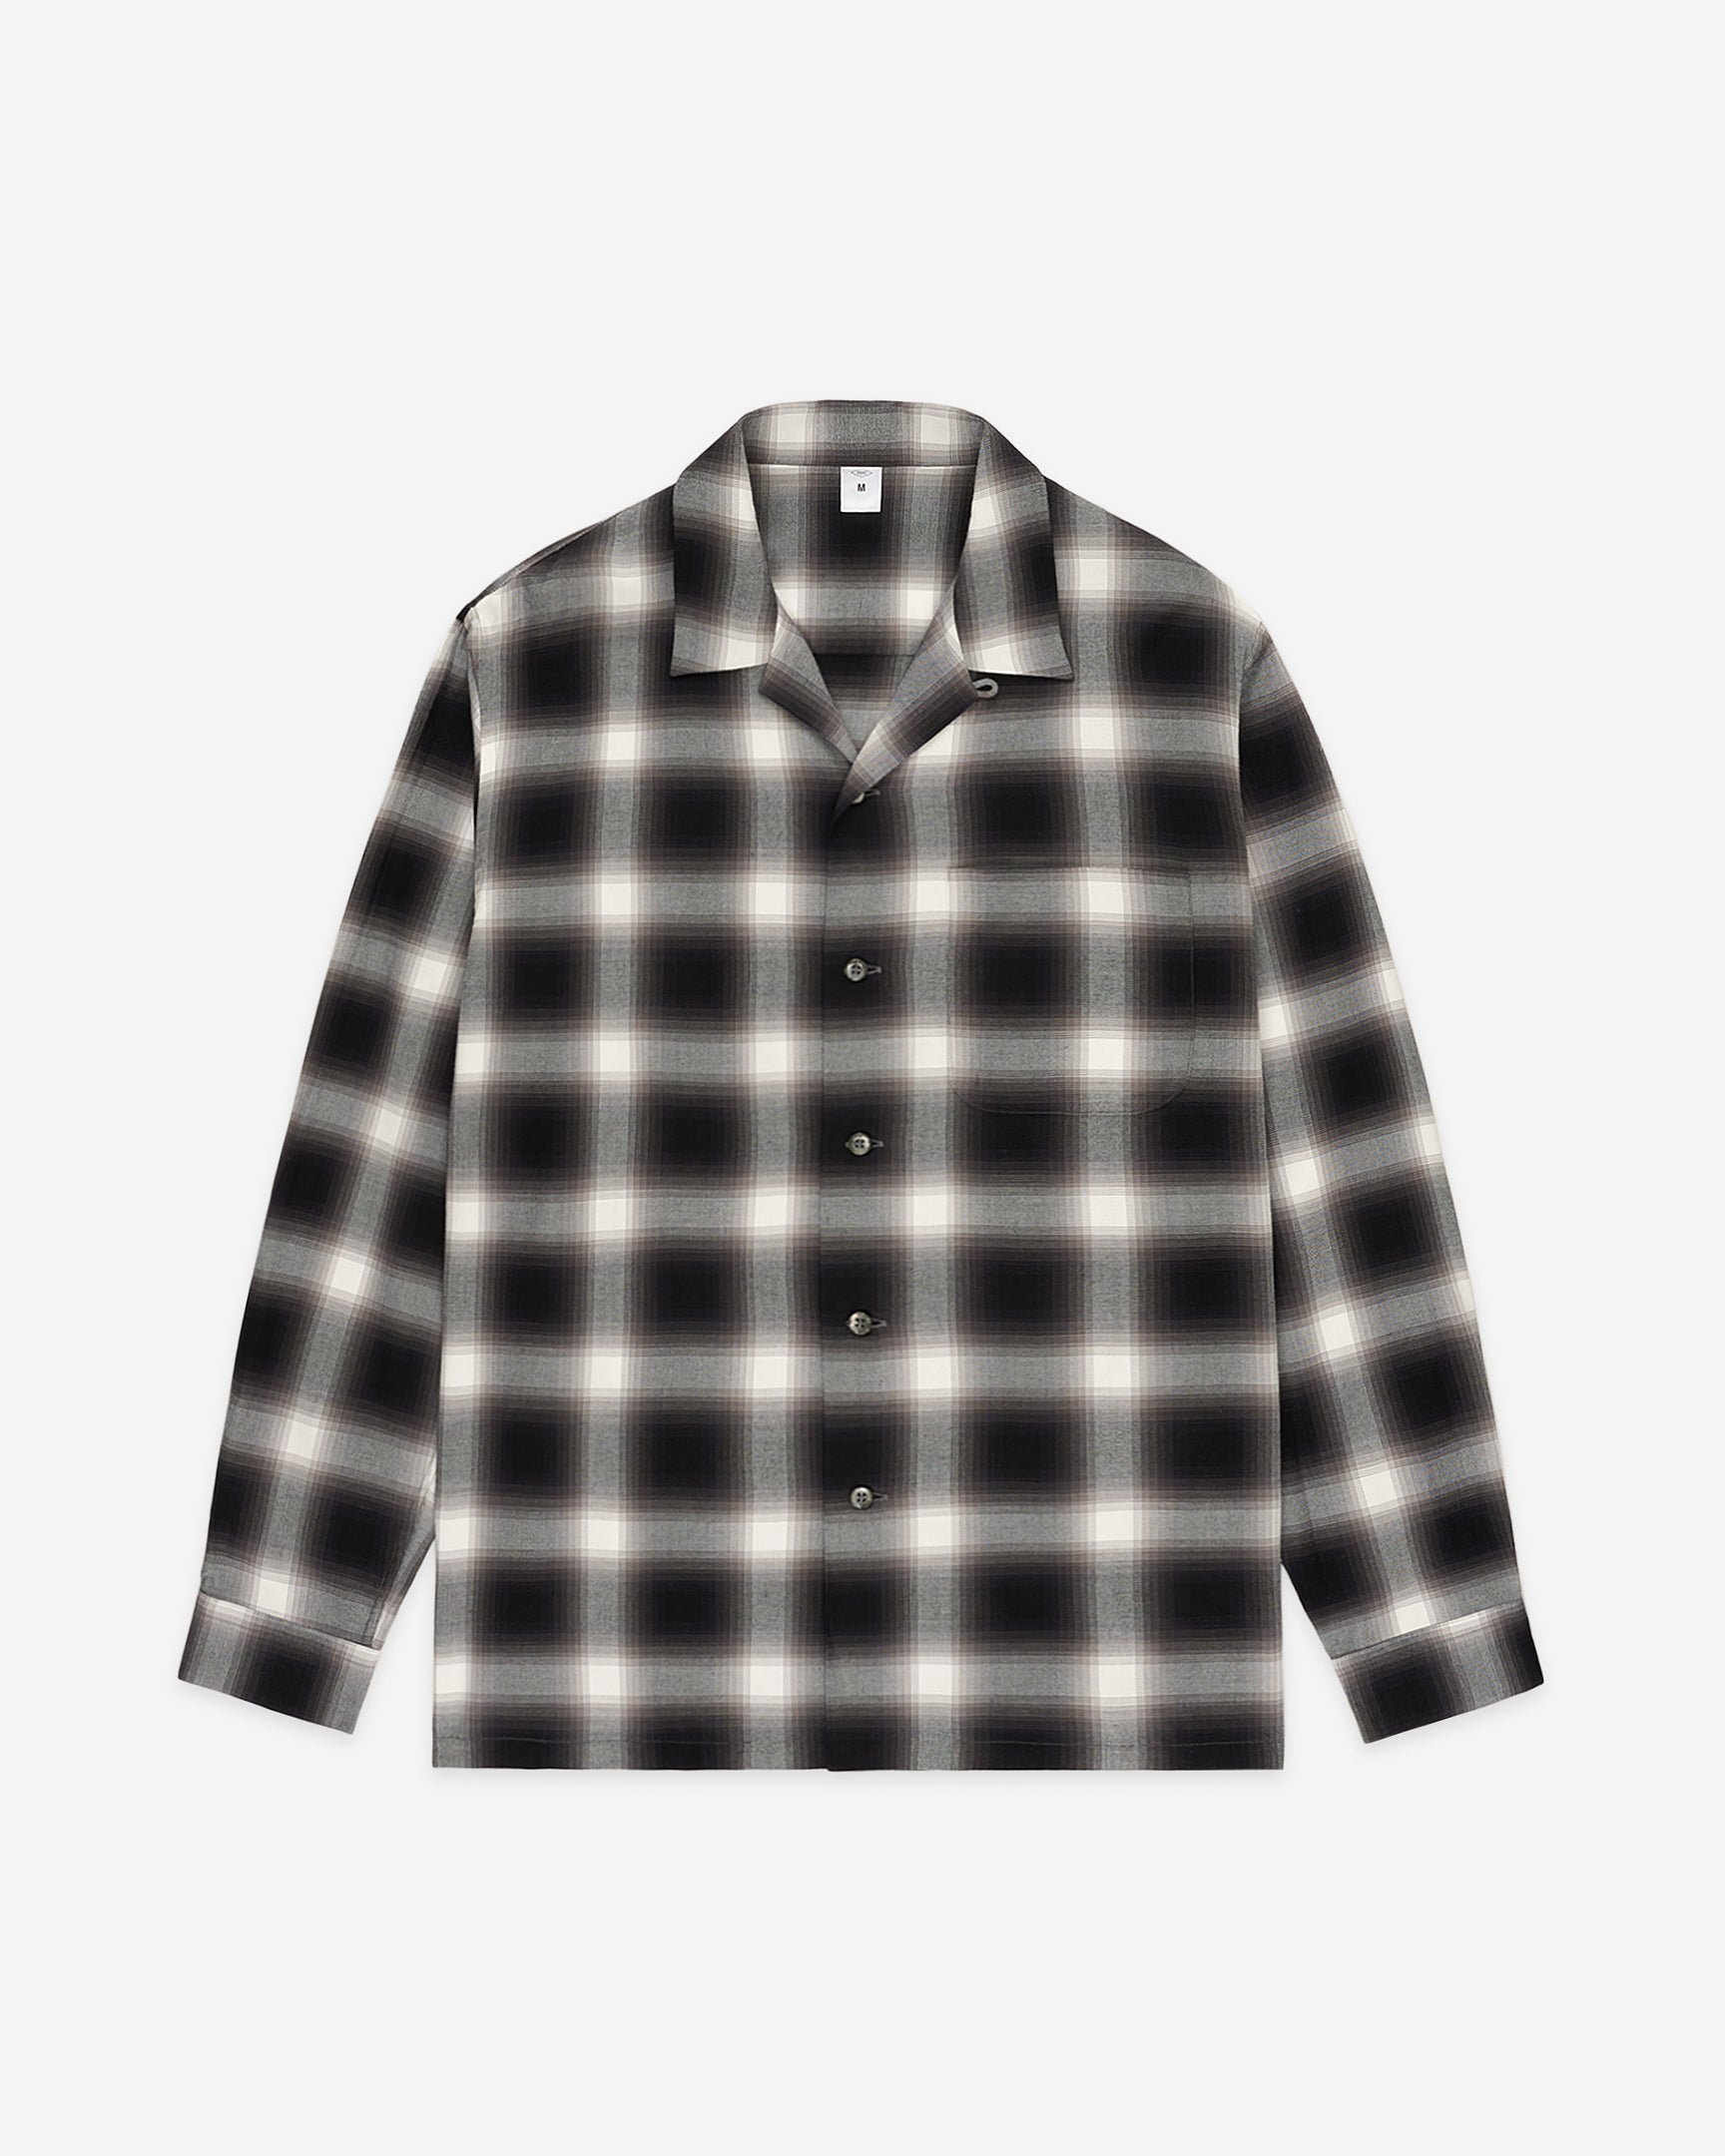 FRONT 11201 Original Ombre Check Shirt Made in Japan